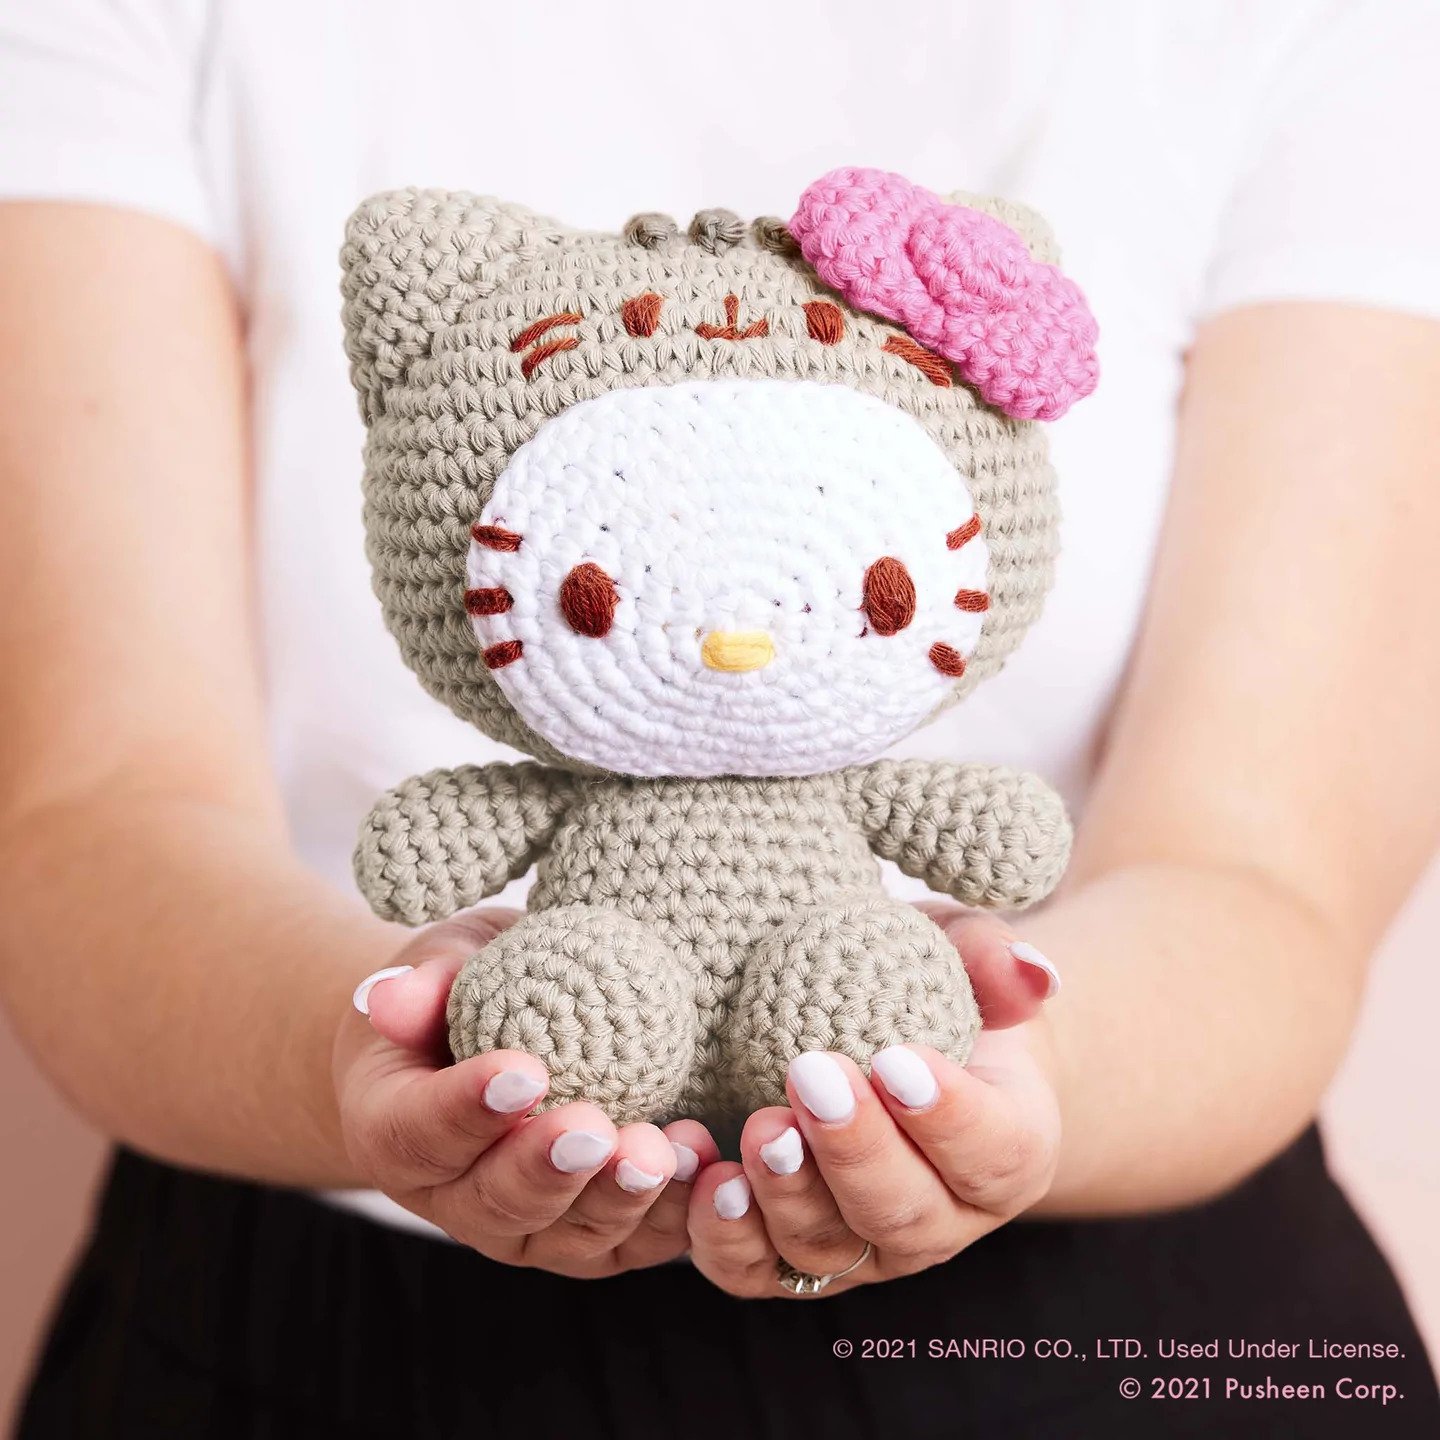 Hello Kitty Crochet Pattern: Step-by-Step Easy Guide - KnitWitch